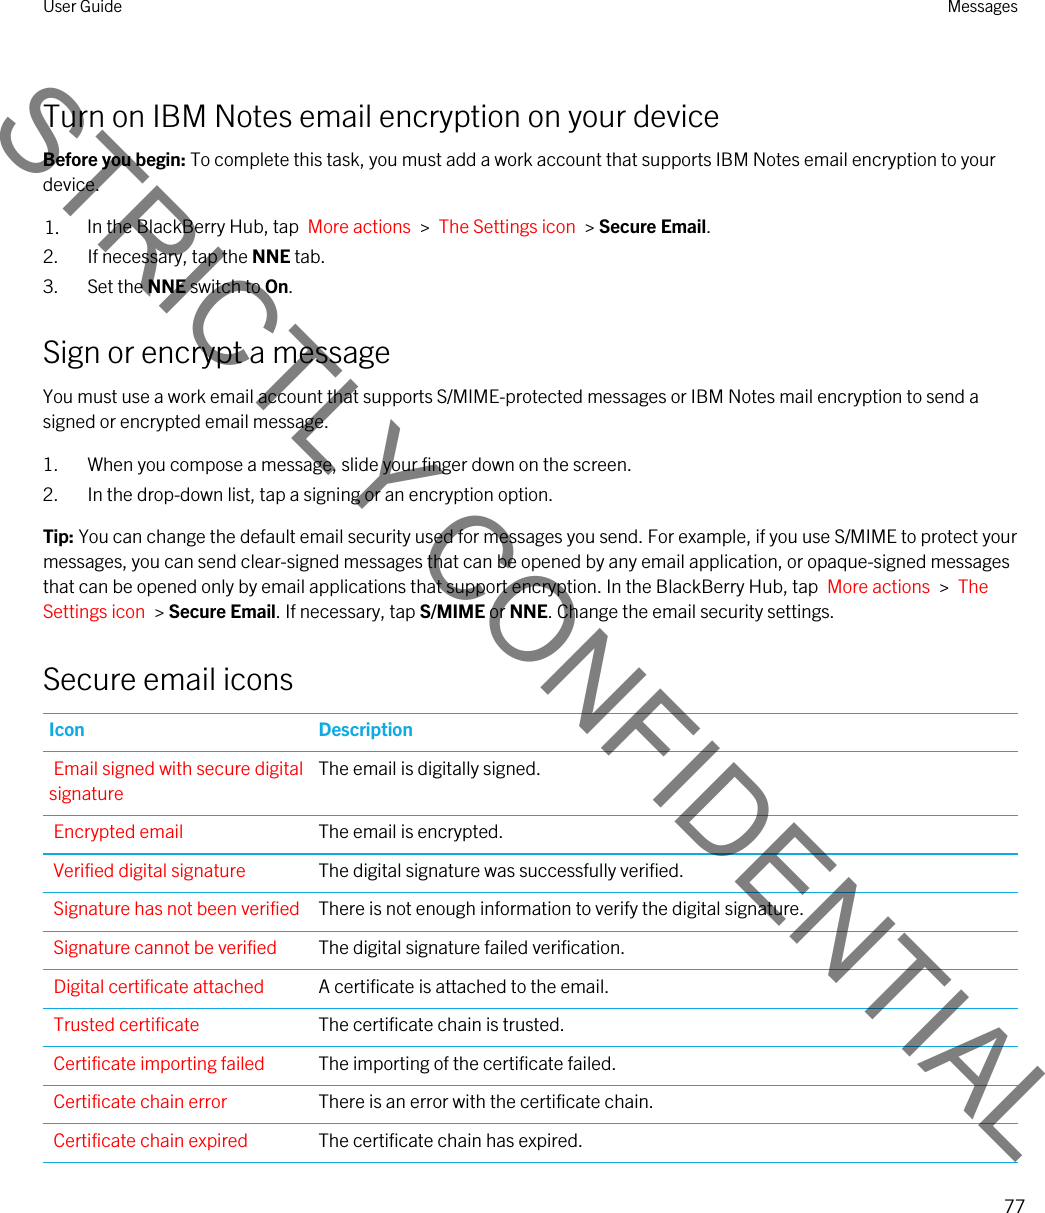 Turn on IBM Notes email encryption on your deviceBefore you begin: To complete this task, you must add a work account that supports IBM Notes email encryption to your device.1. In the BlackBerry Hub, tap  More actions  &gt;  The Settings icon  &gt; Secure Email.2. If necessary, tap the NNE tab.3. Set the NNE switch to On.Sign or encrypt a messageYou must use a work email account that supports S/MIME-protected messages or IBM Notes mail encryption to send a signed or encrypted email message.1. When you compose a message, slide your finger down on the screen.2. In the drop-down list, tap a signing or an encryption option.Tip: You can change the default email security used for messages you send. For example, if you use S/MIME to protect your messages, you can send clear-signed messages that can be opened by any email application, or opaque-signed messages that can be opened only by email applications that support encryption. In the BlackBerry Hub, tap  More actions  &gt;  The Settings icon  &gt; Secure Email. If necessary, tap S/MIME or NNE. Change the email security settings.Secure email iconsIcon DescriptionEmail signed with secure digital signatureThe email is digitally signed.Encrypted email The email is encrypted.Verified digital signature The digital signature was successfully verified.Signature has not been verified There is not enough information to verify the digital signature.Signature cannot be verified The digital signature failed verification.Digital certificate attached A certificate is attached to the email.Trusted certificate The certificate chain is trusted.Certificate importing failed The importing of the certificate failed.Certificate chain error There is an error with the certificate chain.Certificate chain expired The certificate chain has expired.User Guide Messages77STRICTLY CONFIDENTIAL